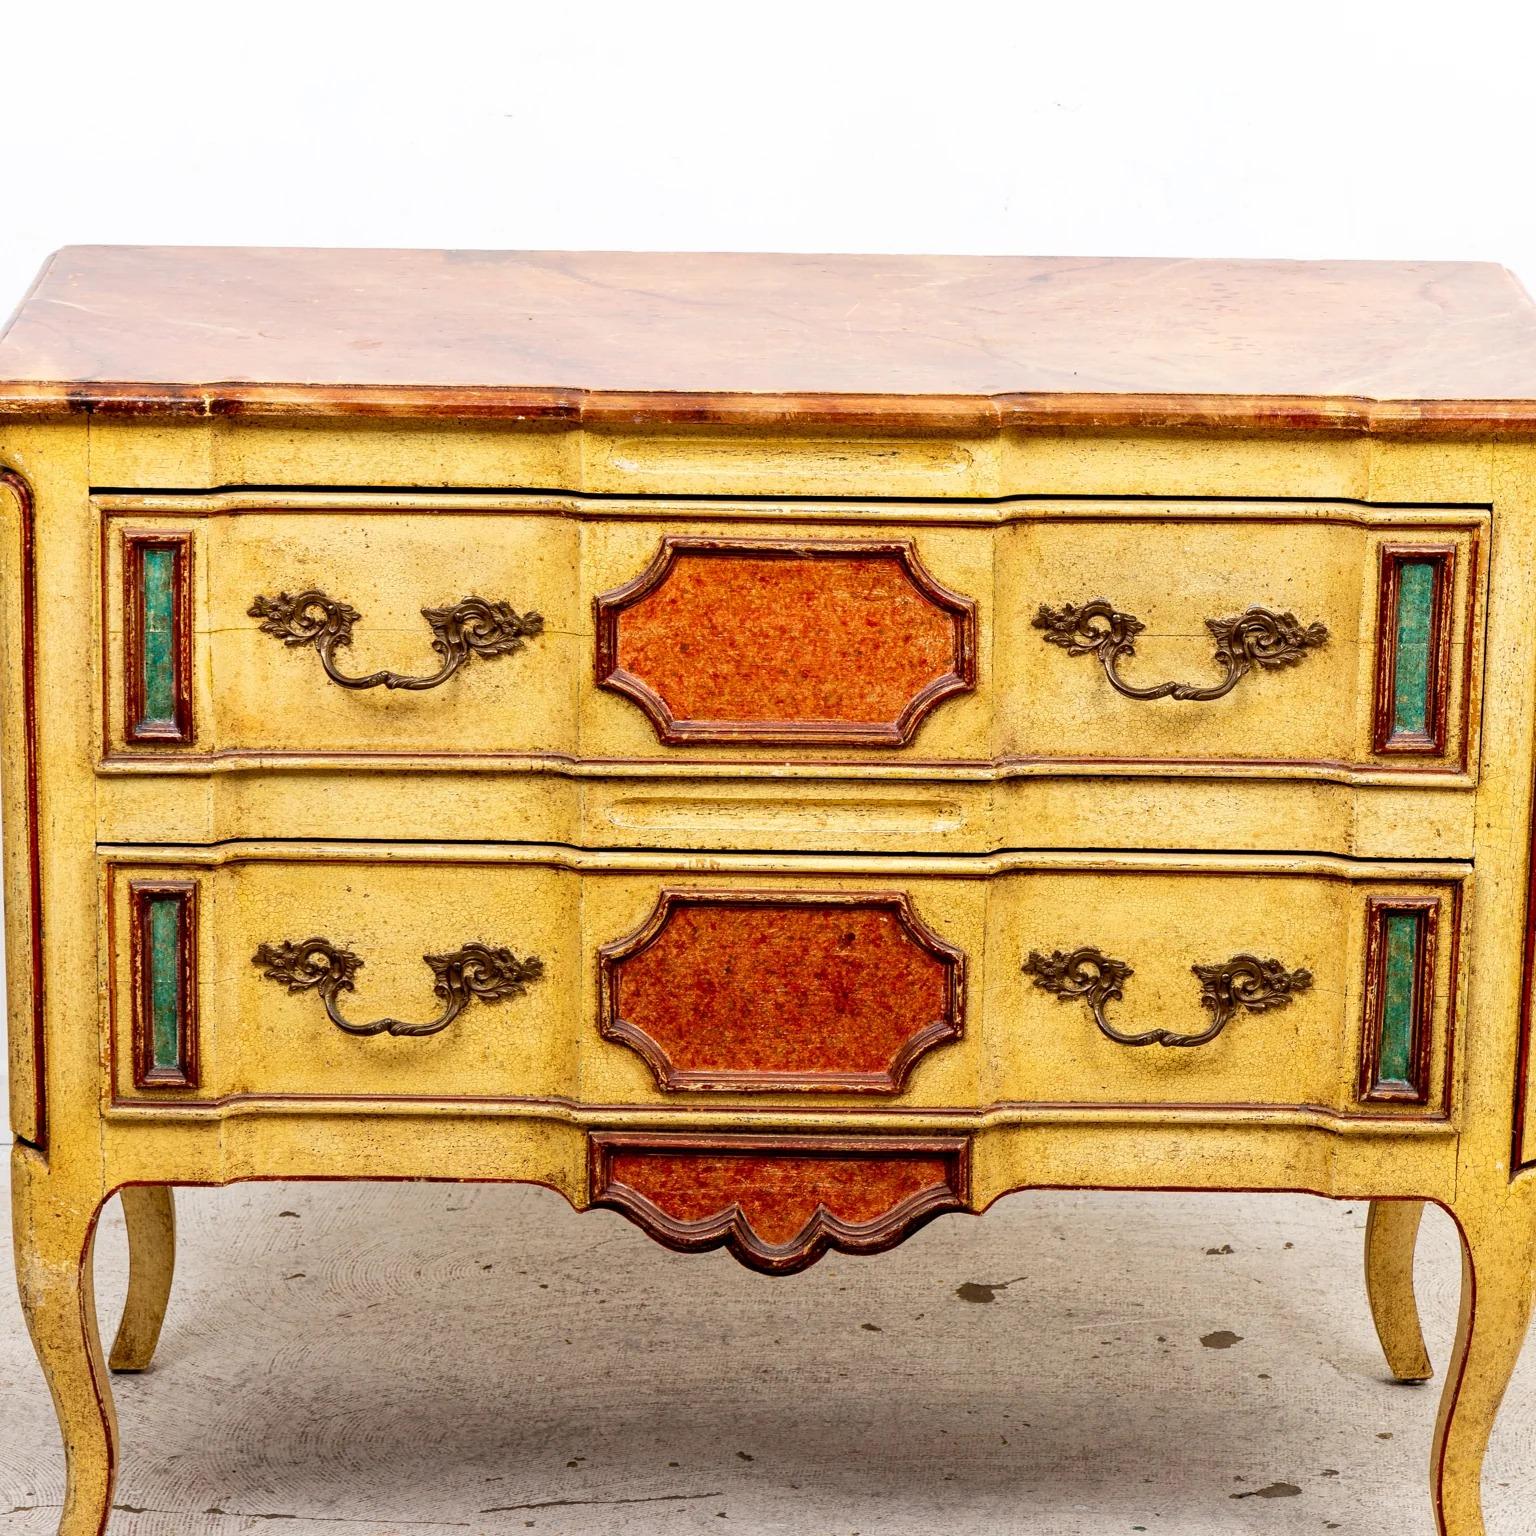 Hollywood Regency period paint decorated chest. The case featuring panels painted to mimic stone, along with a faux stone painted shaped top. Cabriole legs and an undulating front give this chest a sculptural facade. Please note of wear consistent